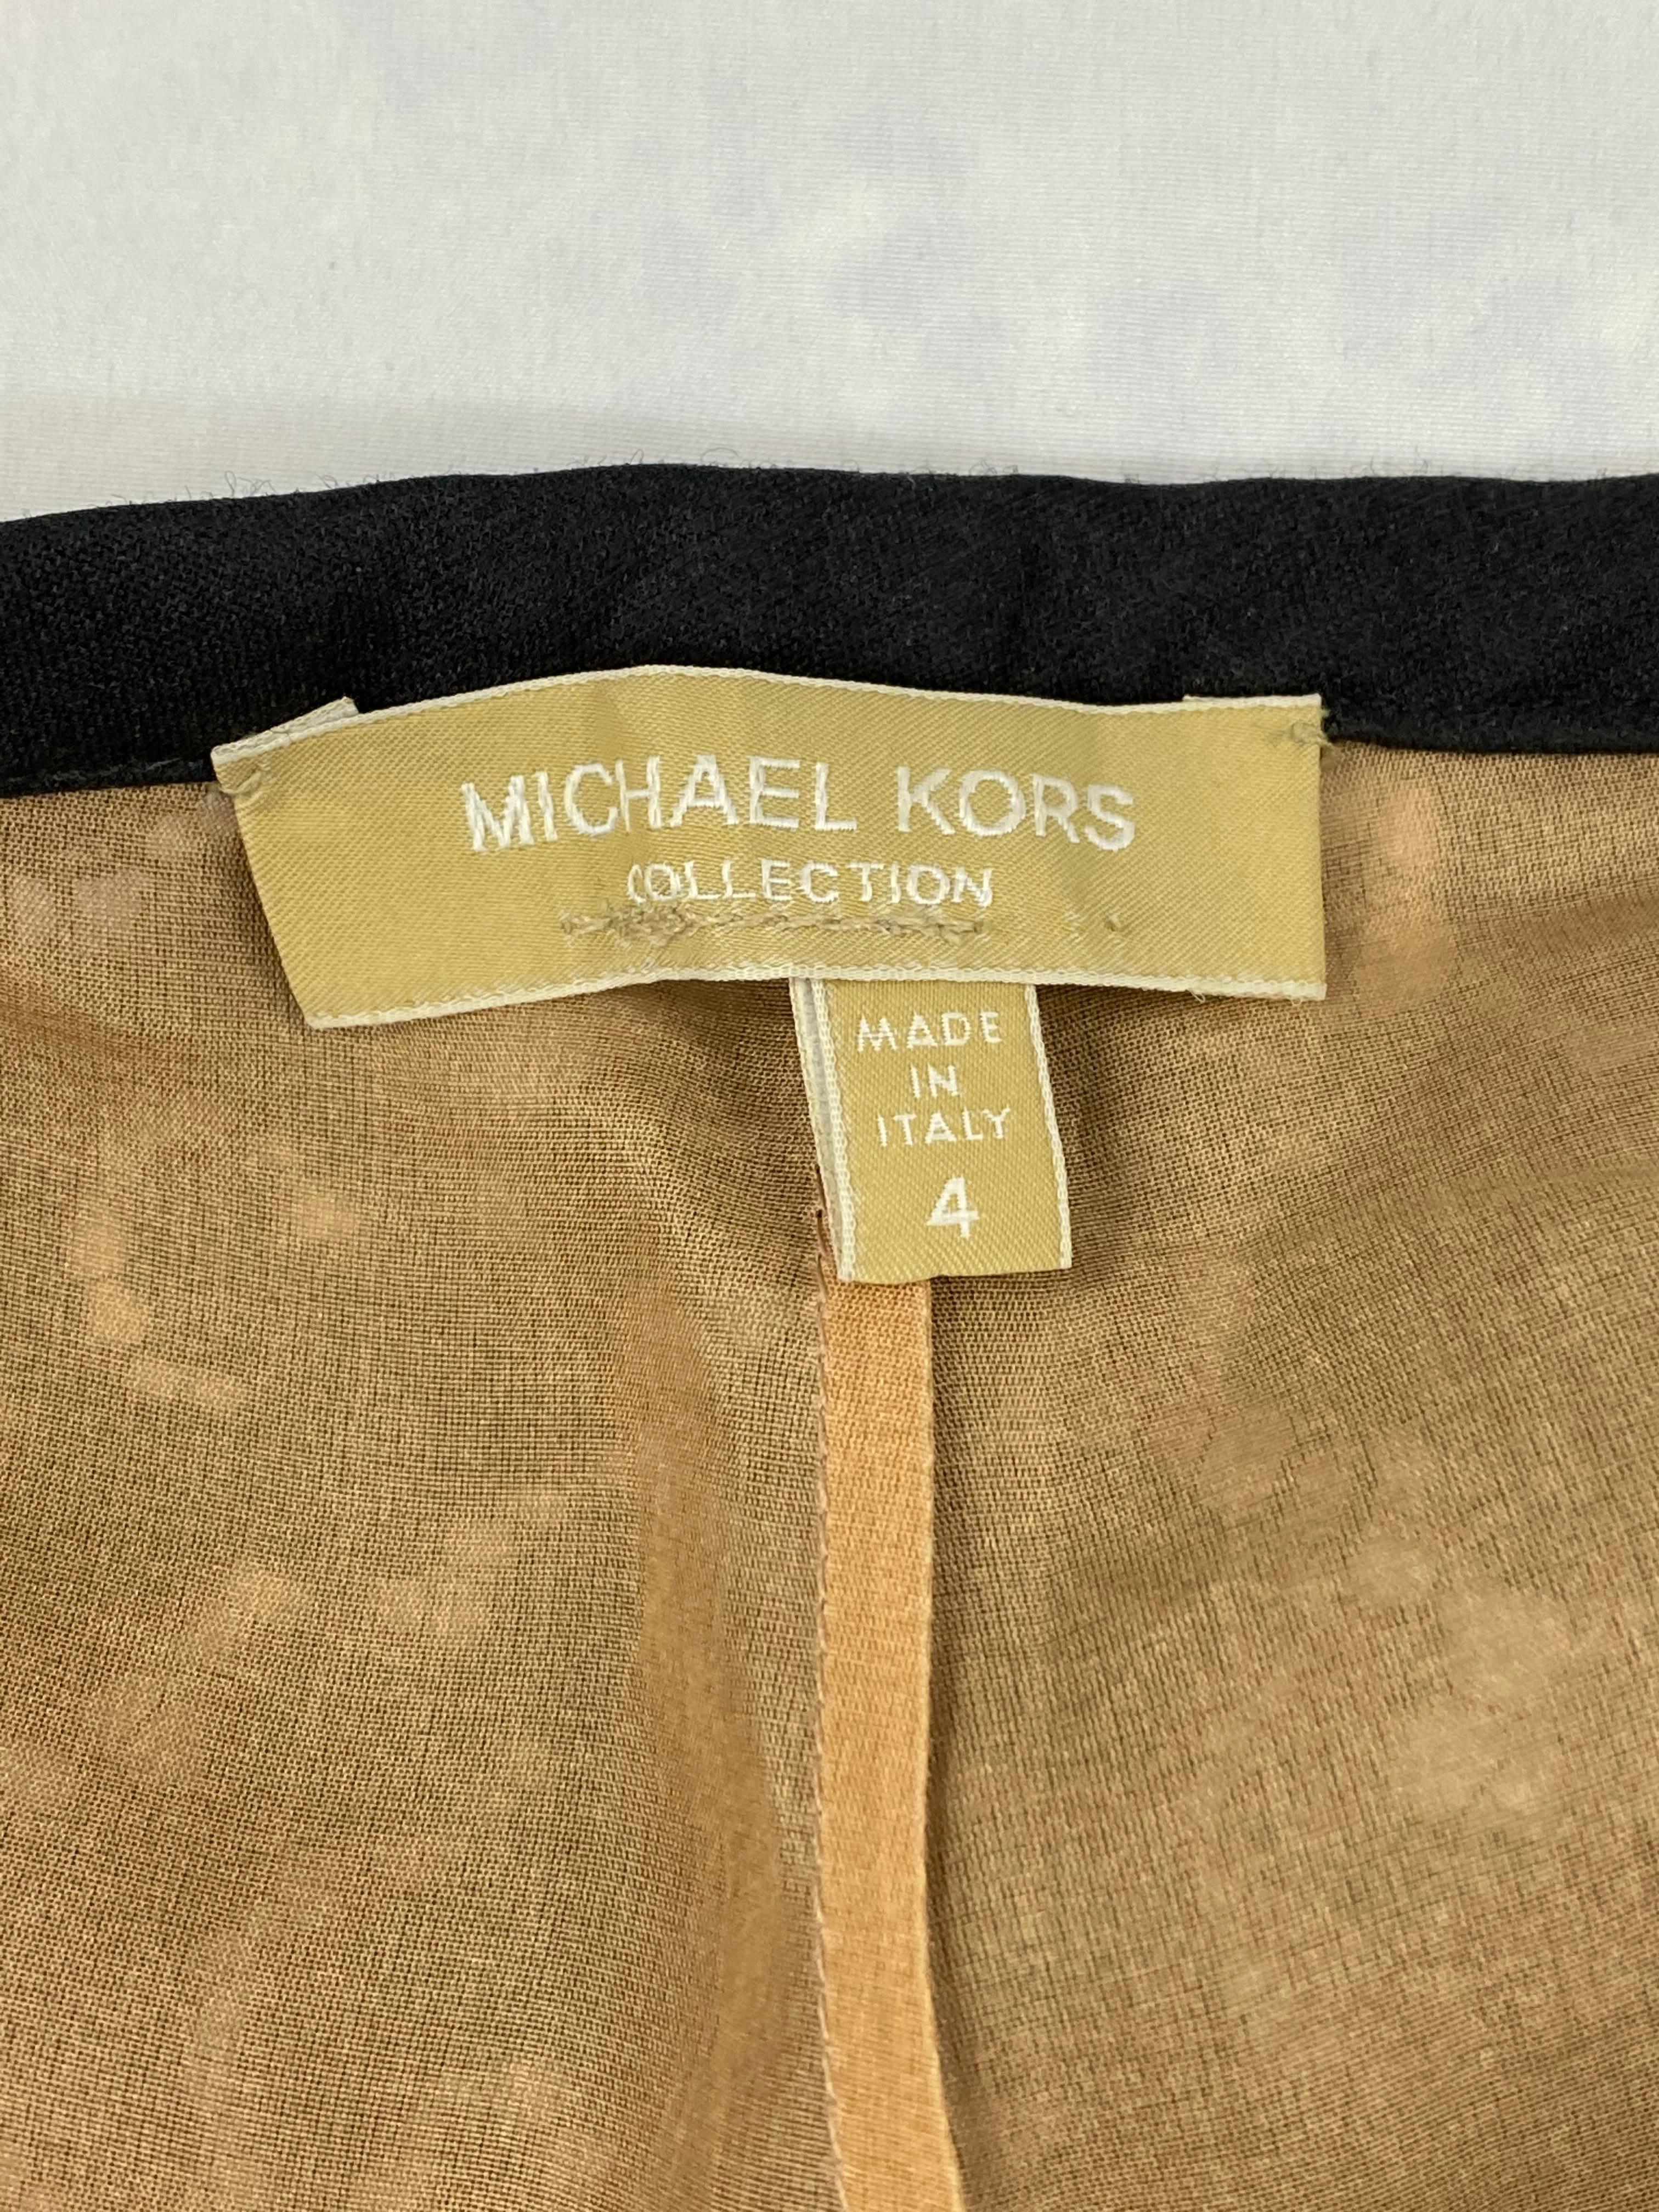 Michael Kors Collection Black and Beige Lace Skinny Pants Size 4  For Sale 1